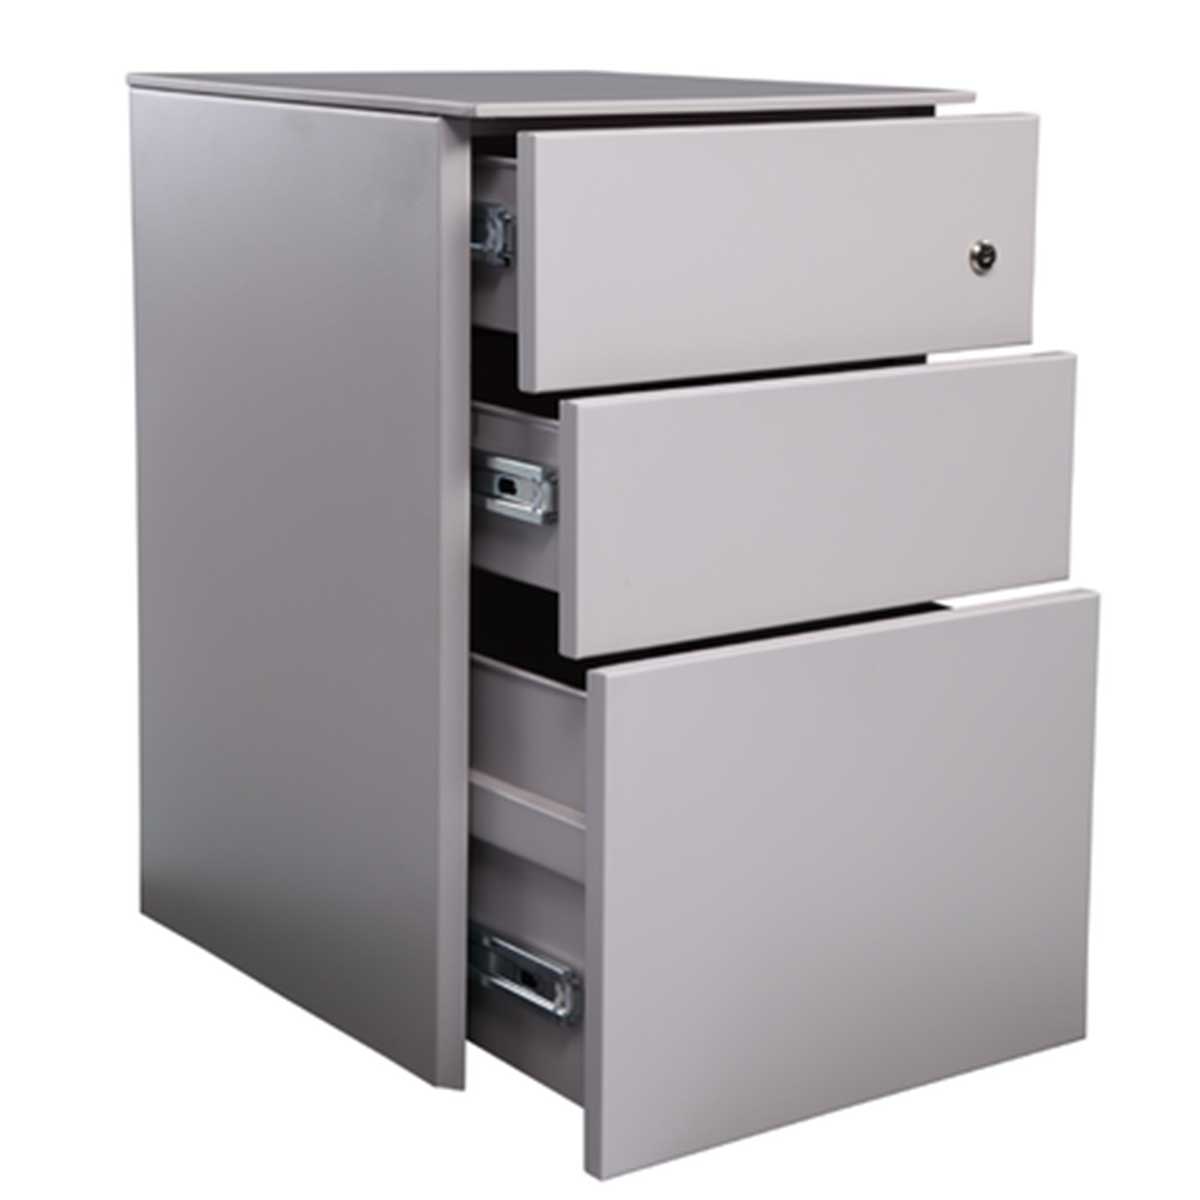 Pedestal Drawer Manufacturers, Suppliers in Rohini Sector 14